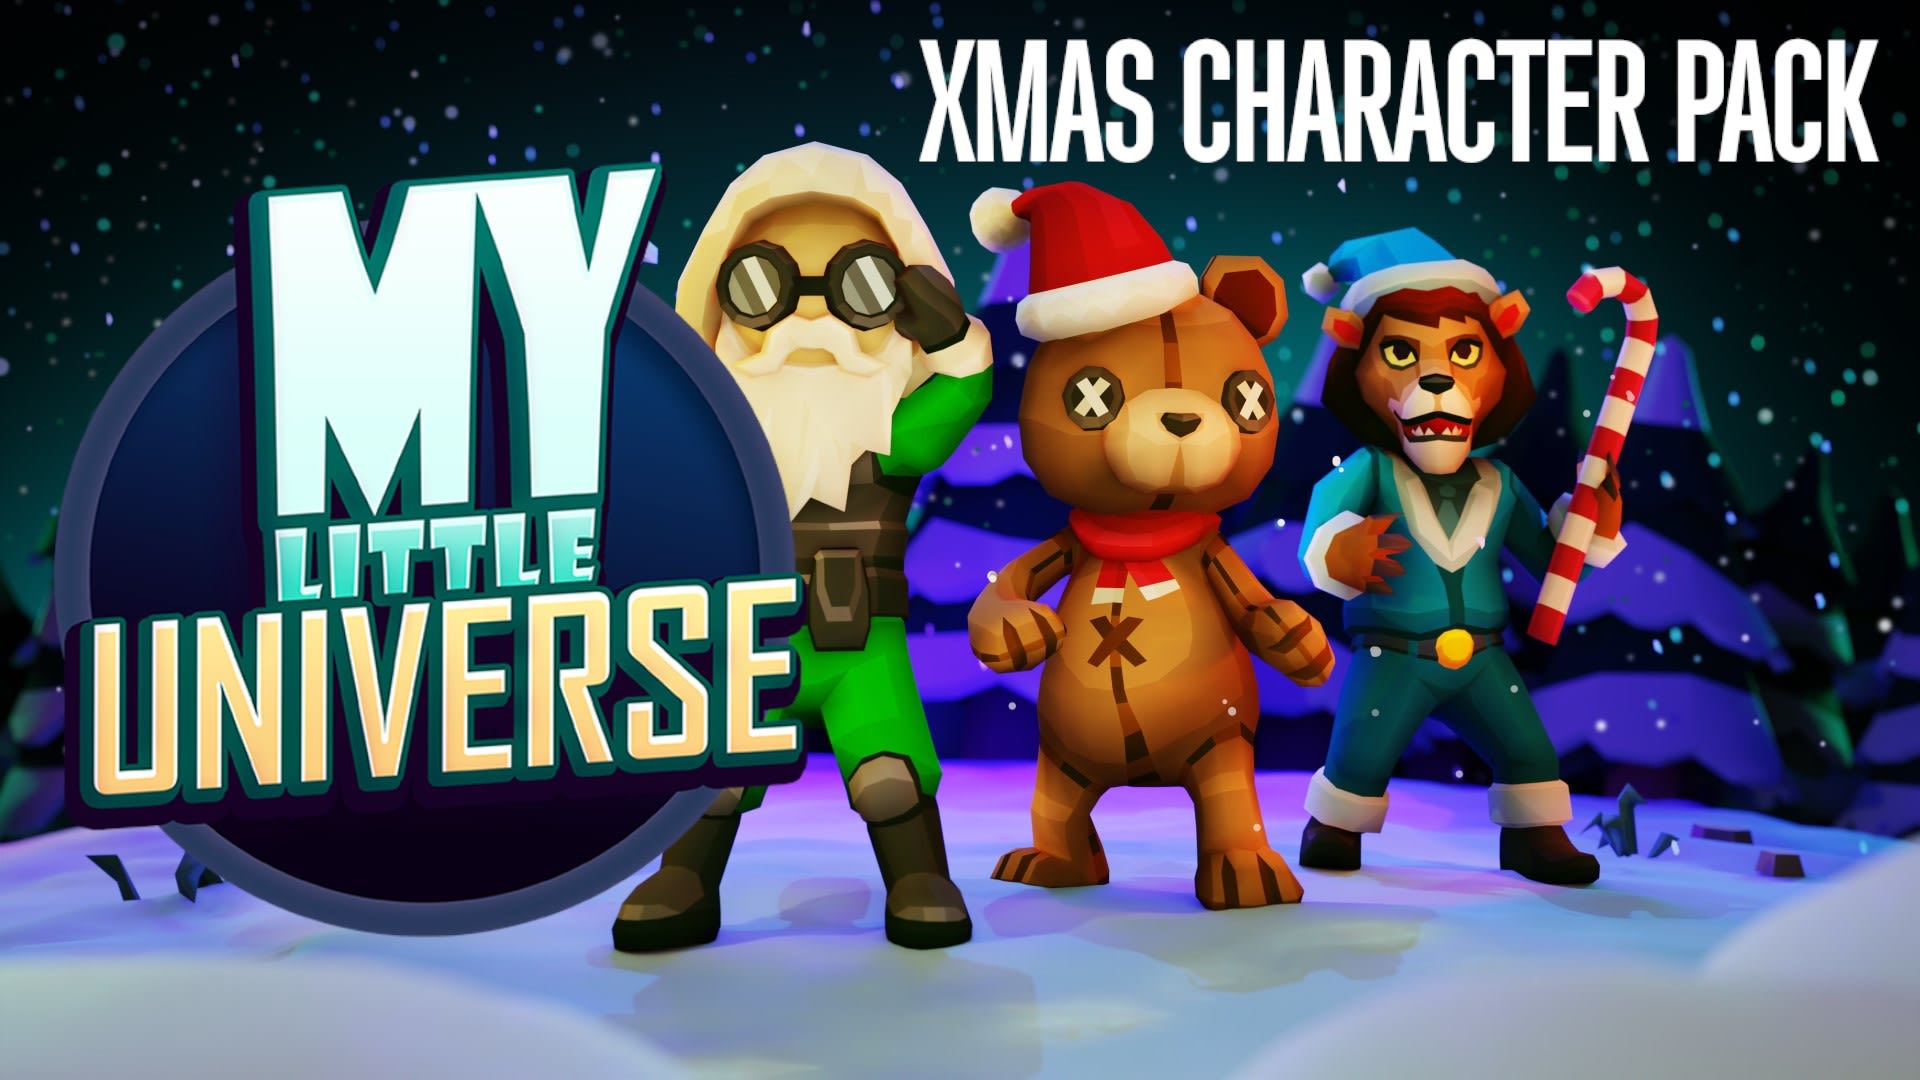 My Little Universe: Xmas Character Pack